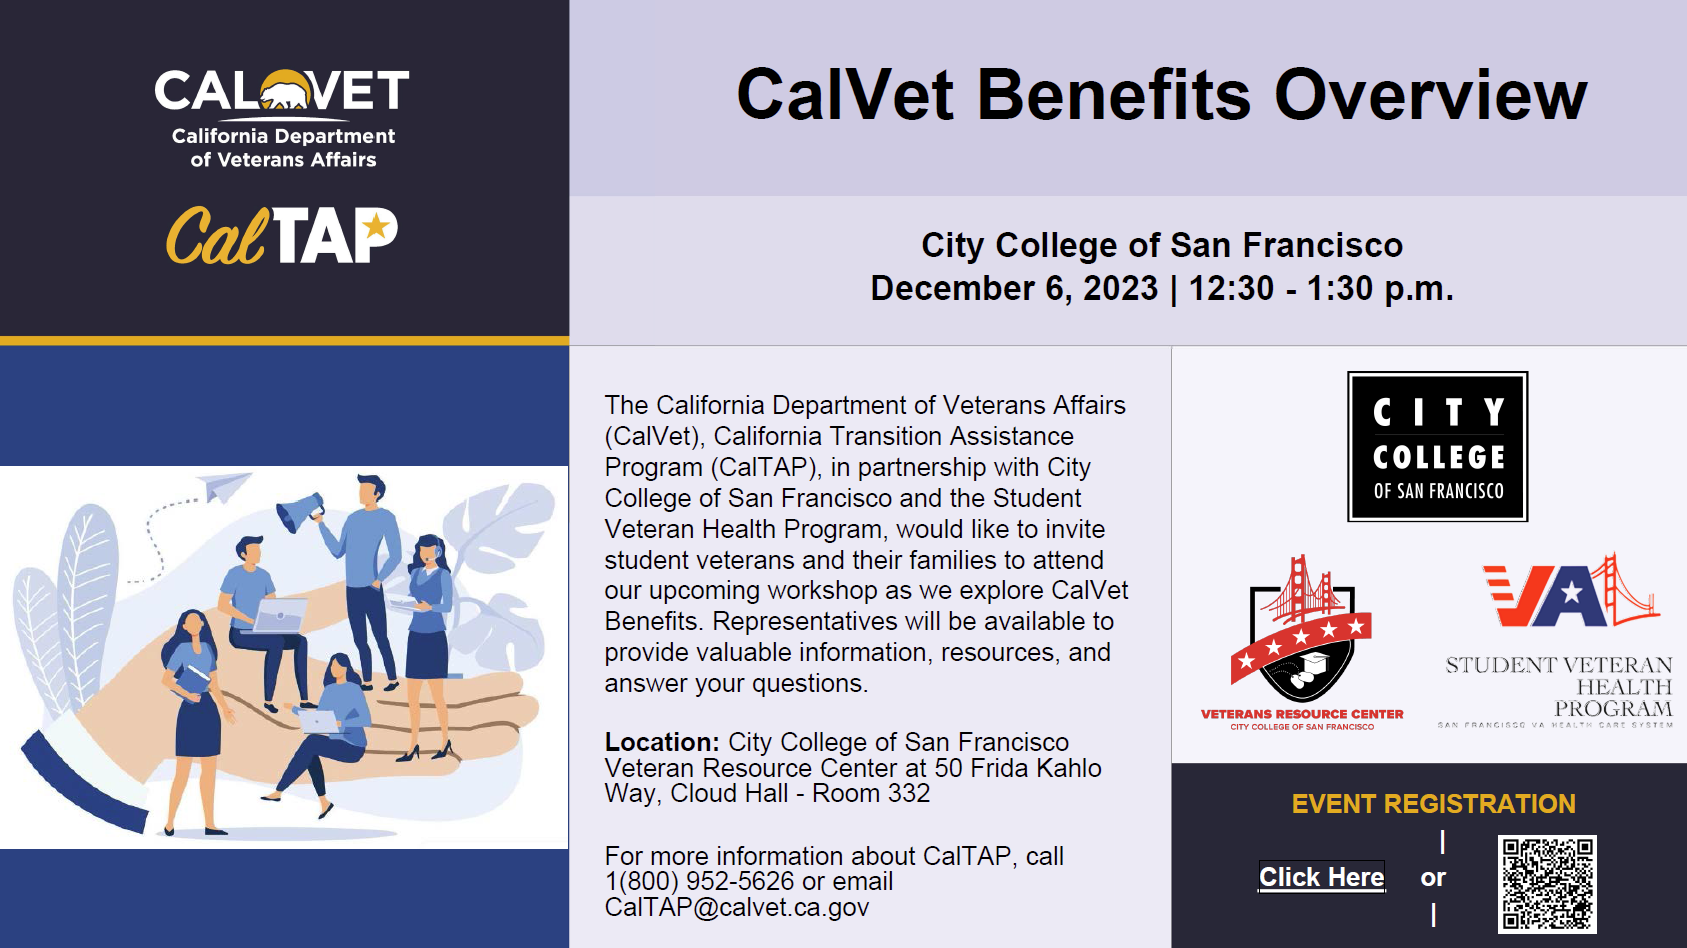 This is a flyer with the registration link and QR code for CalVET Benefits Overview Presentation along with some information on how to get CalVET assistance.